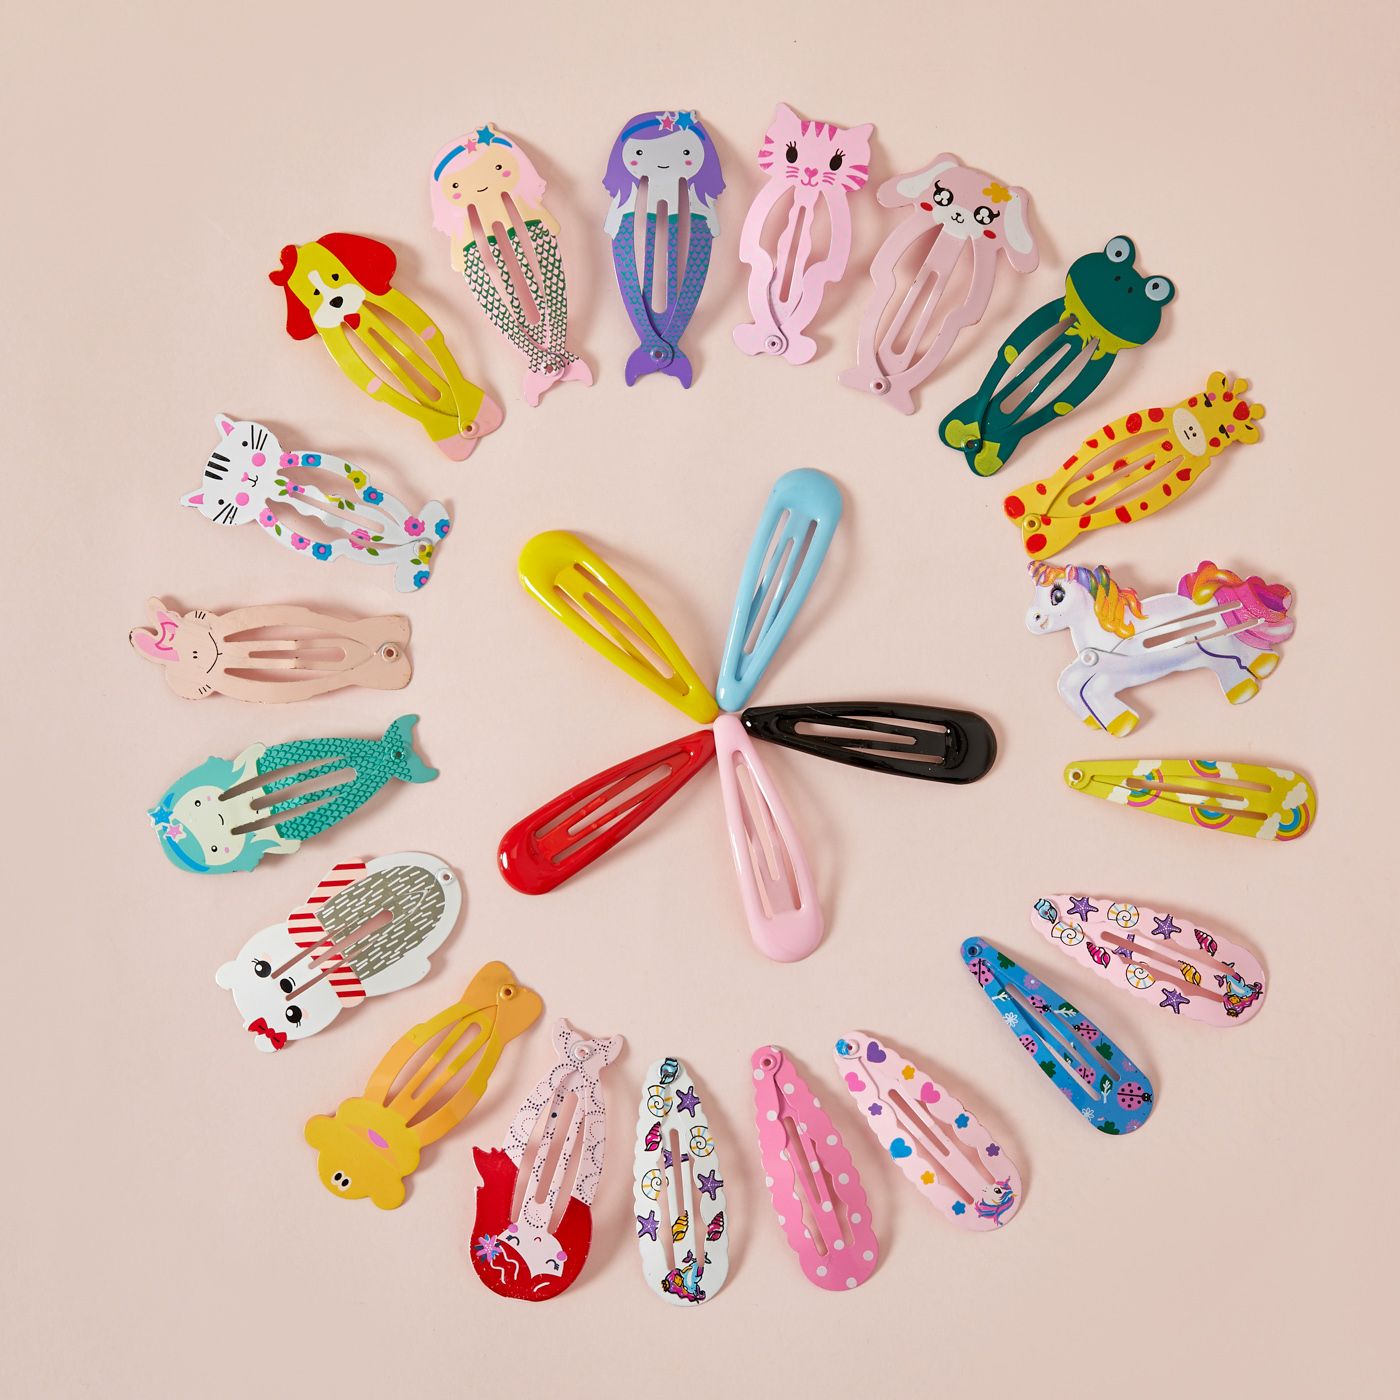 25-pcs Cute Candy Color Cartoon Design Hair Clips for Girls